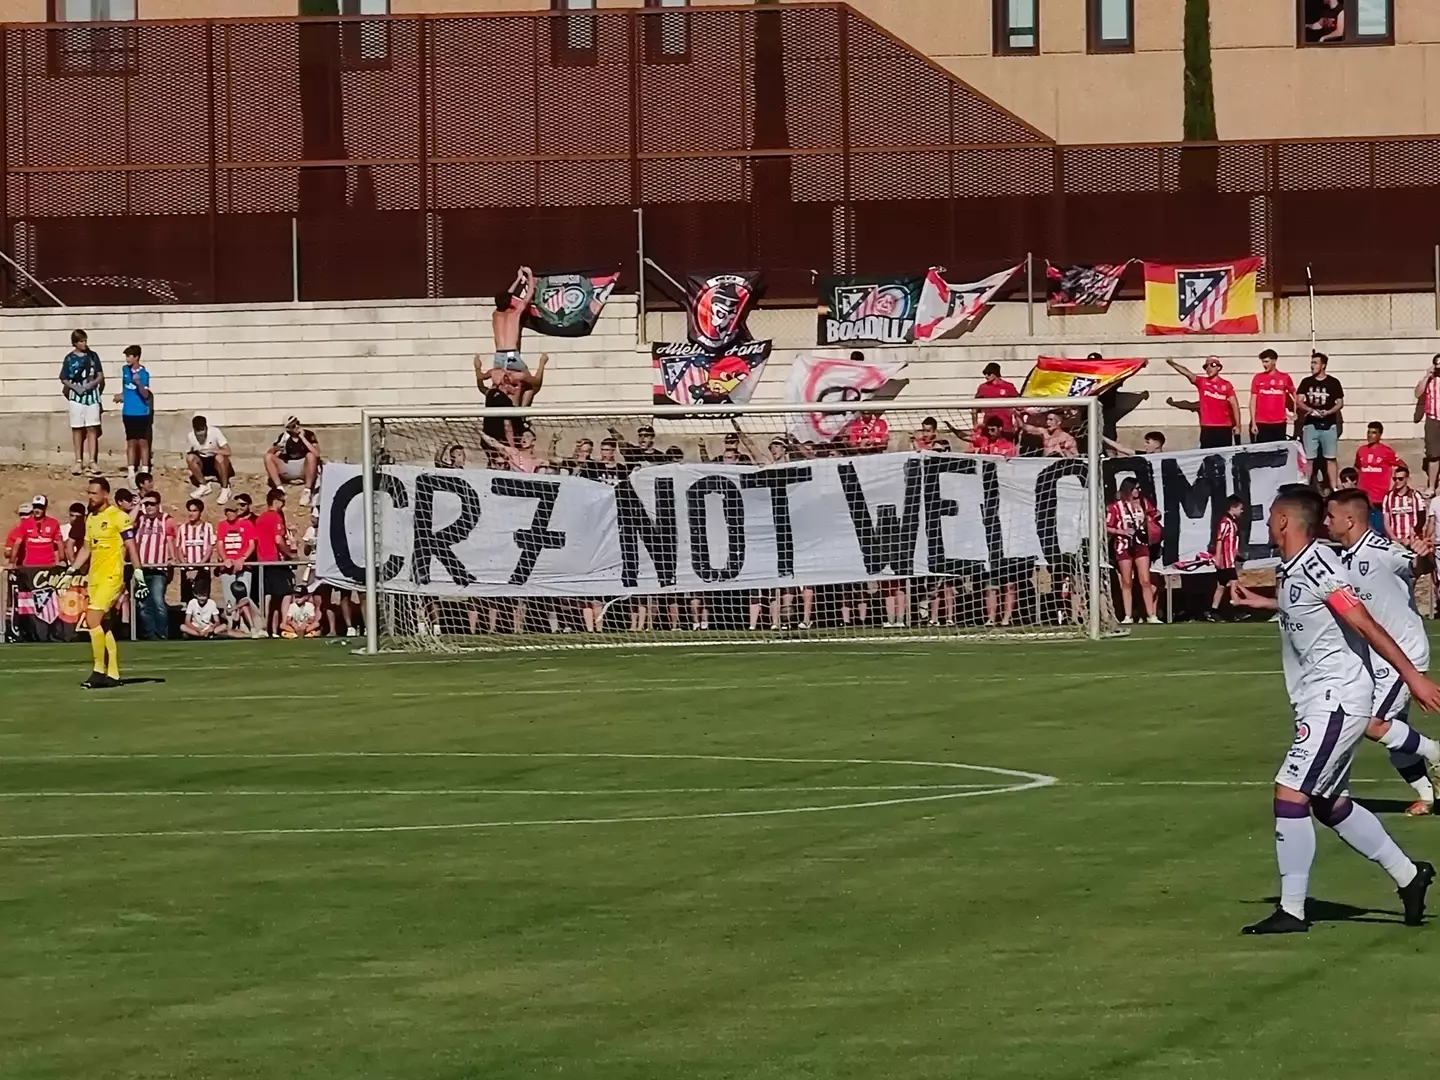 Atletico Madrid fans produced a "CR7 NOT WELCOME" sign at a pre-season friendly on Wednesday. (Twitter: JaviGomezCh)